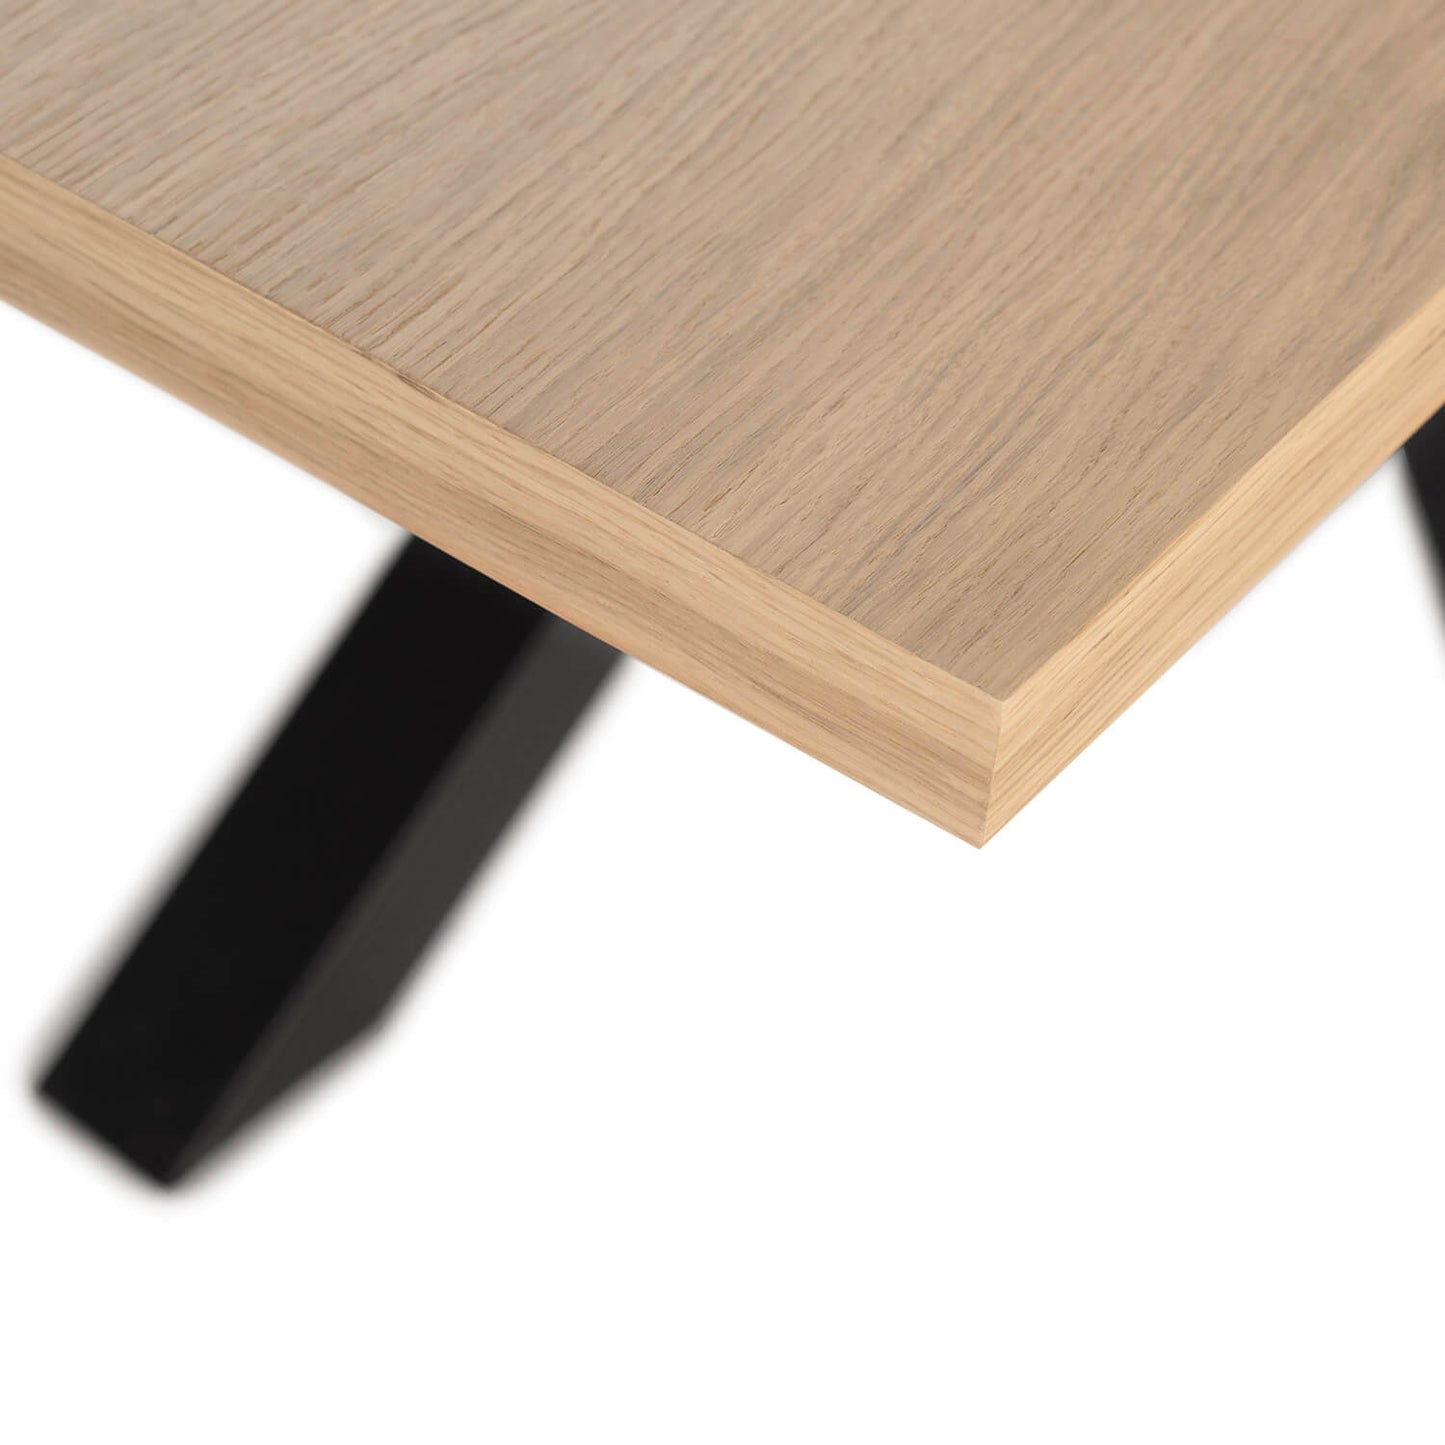 Casia dining table